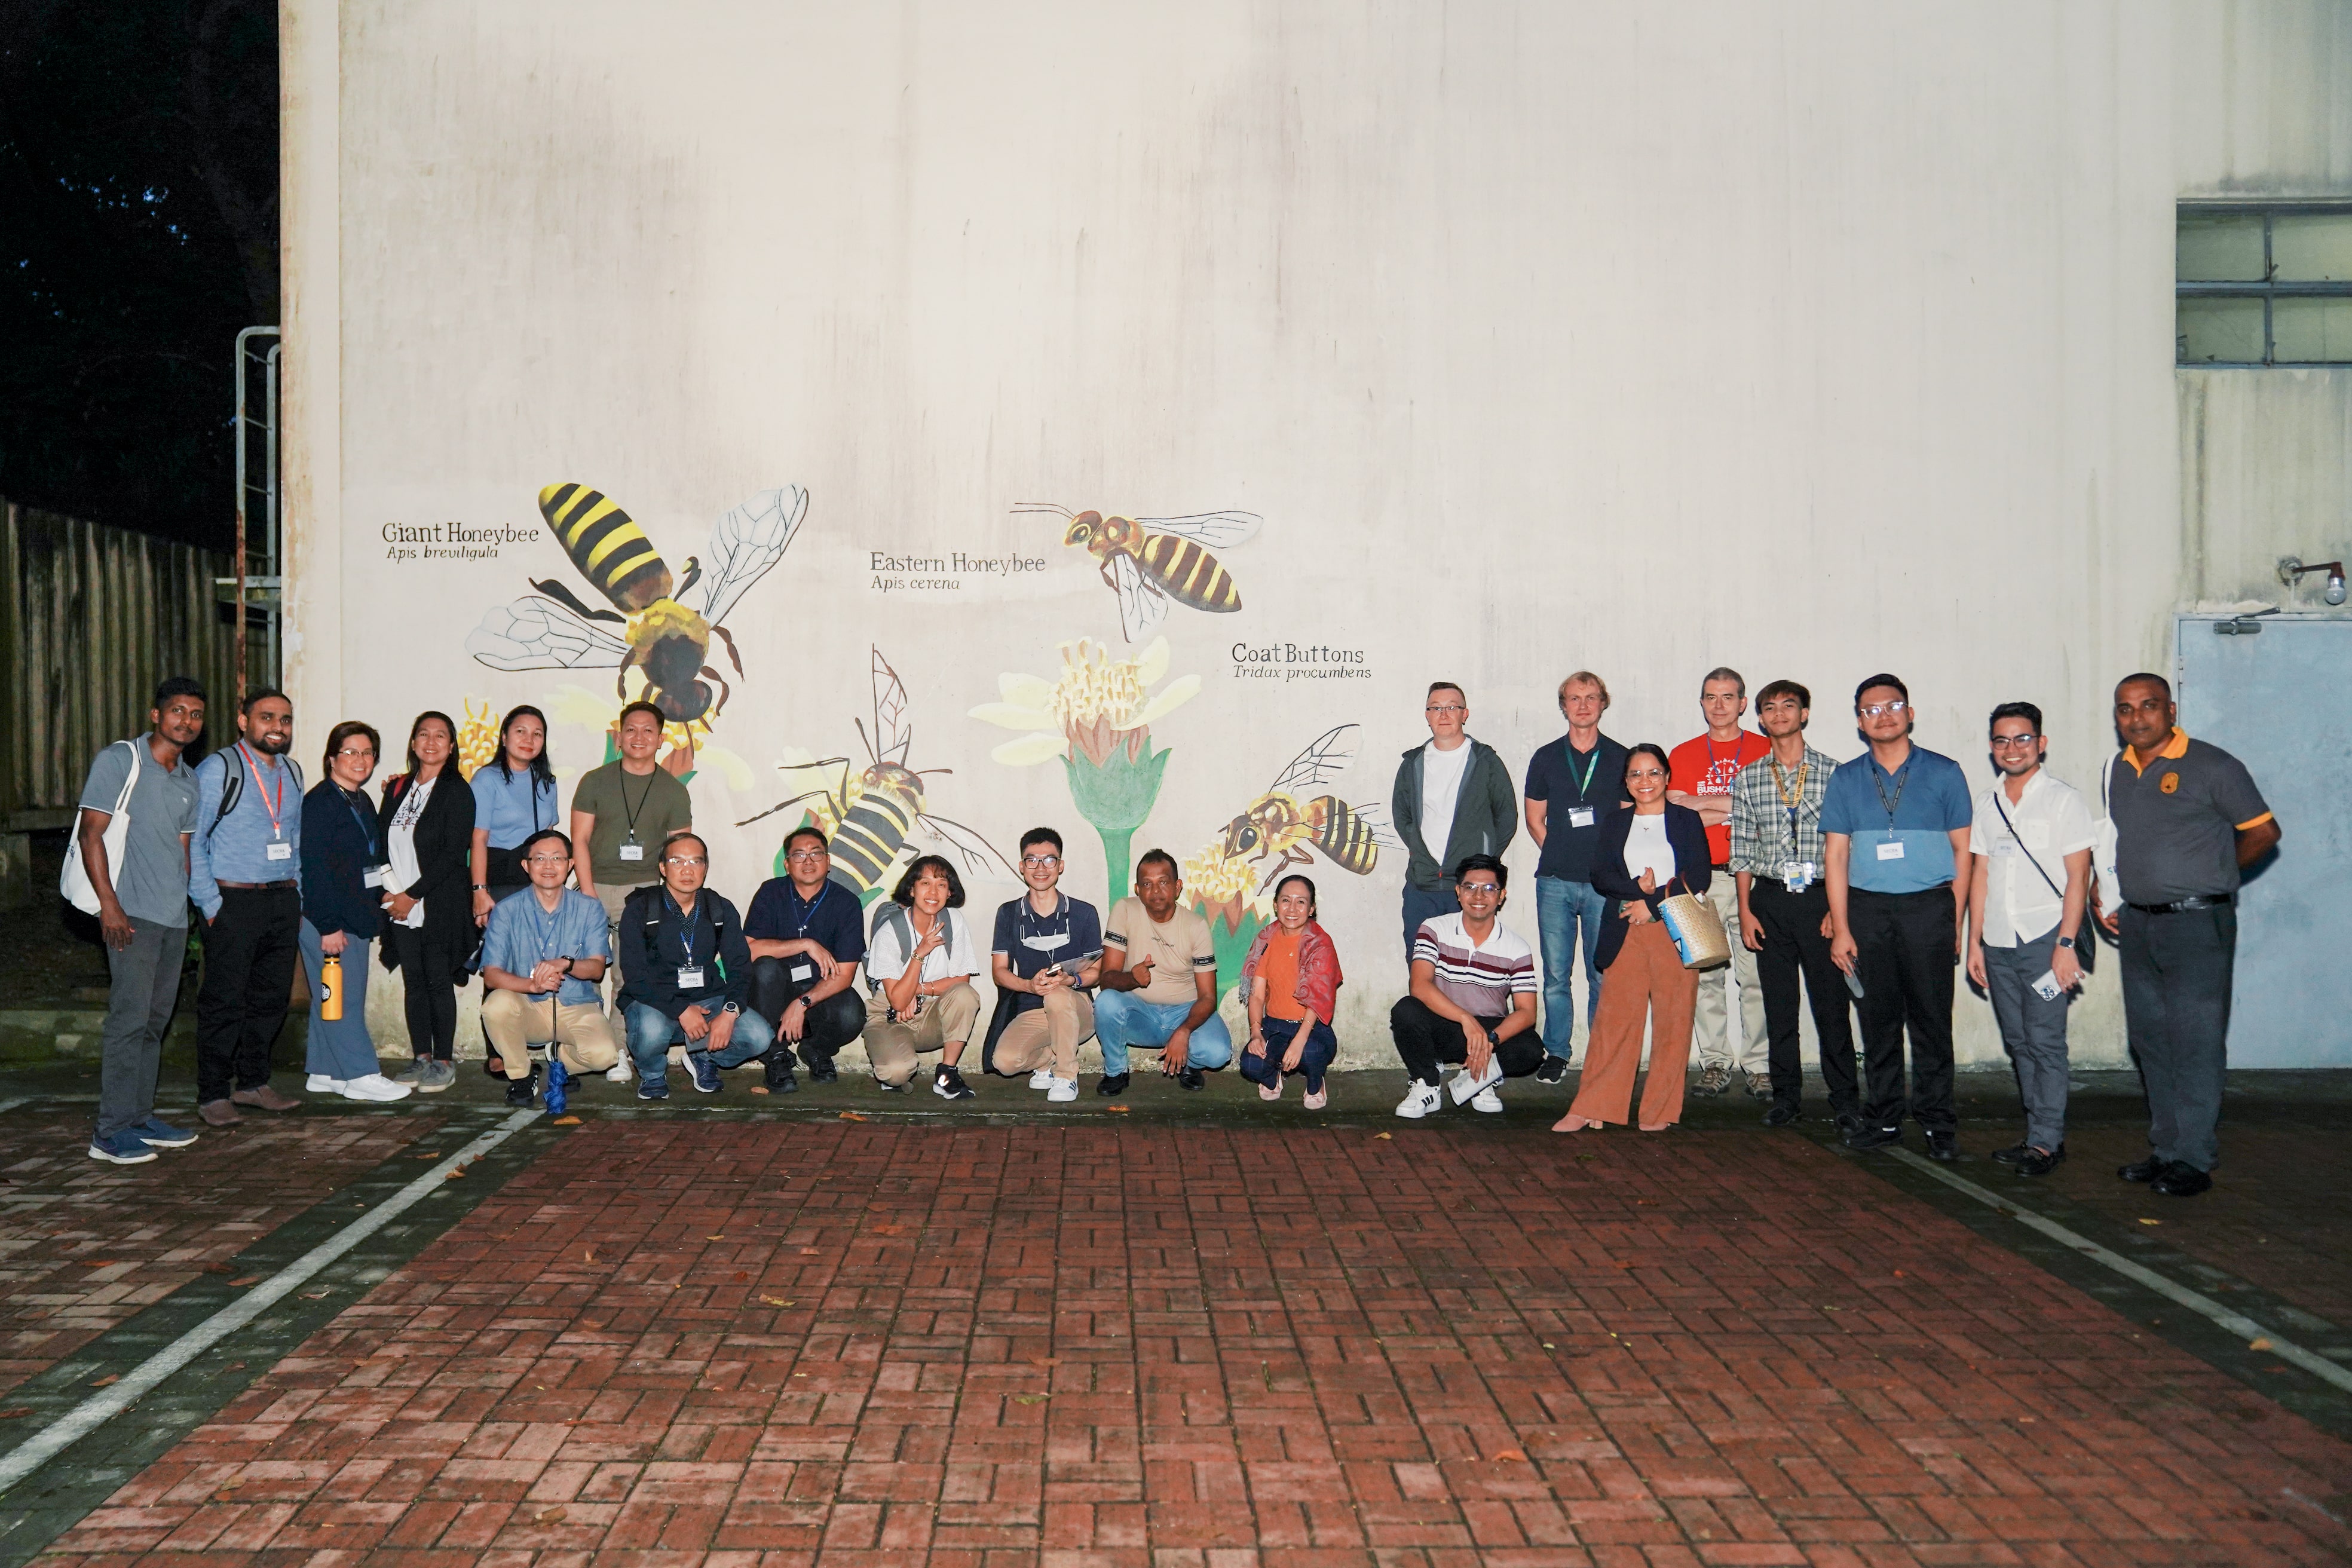 SECRA consortium members during the Sustainability Walk in front of the Pollinator Mural along College Lane.